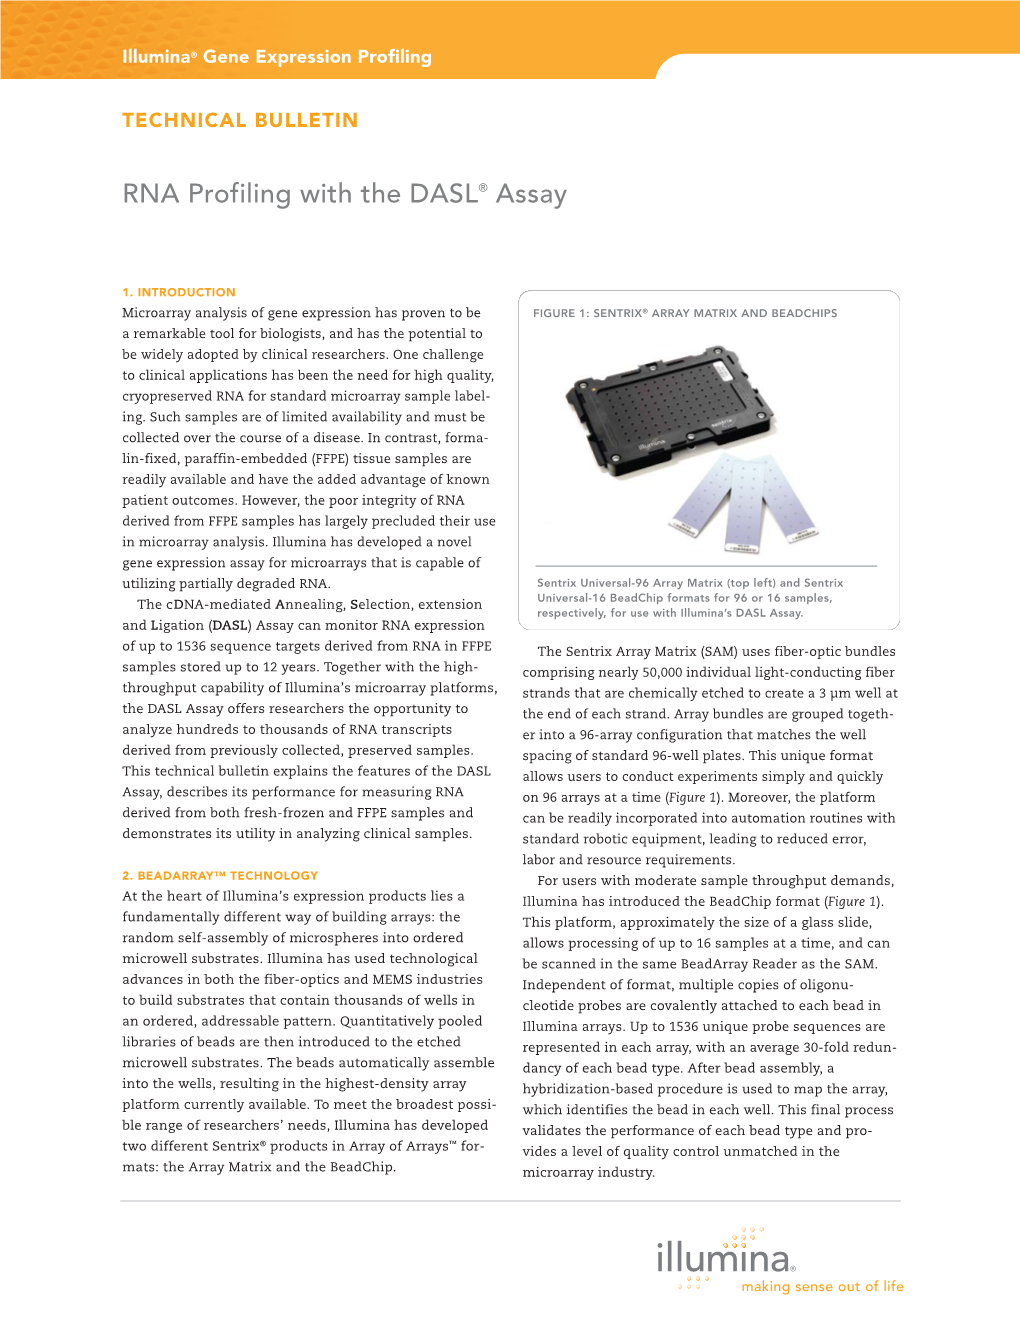 RNA Profiling with the DASL Assay